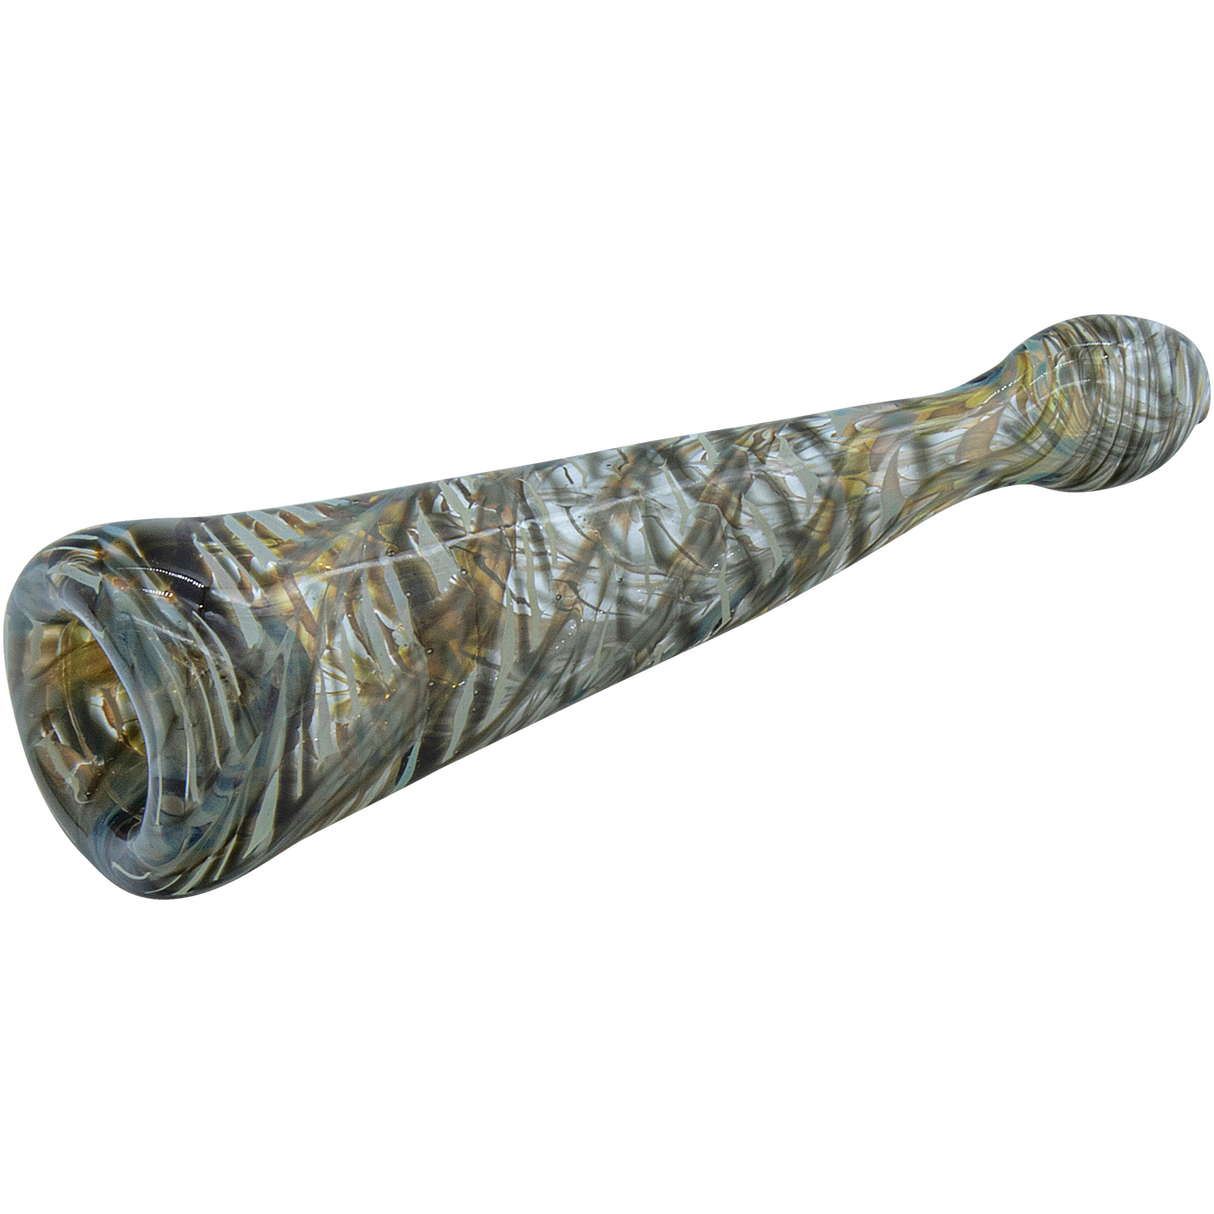 LA Pipes "Typhoon" Colored Chillum - 4.5" Fumed Glass Hand Pipe for Dry Herbs, Black Variant